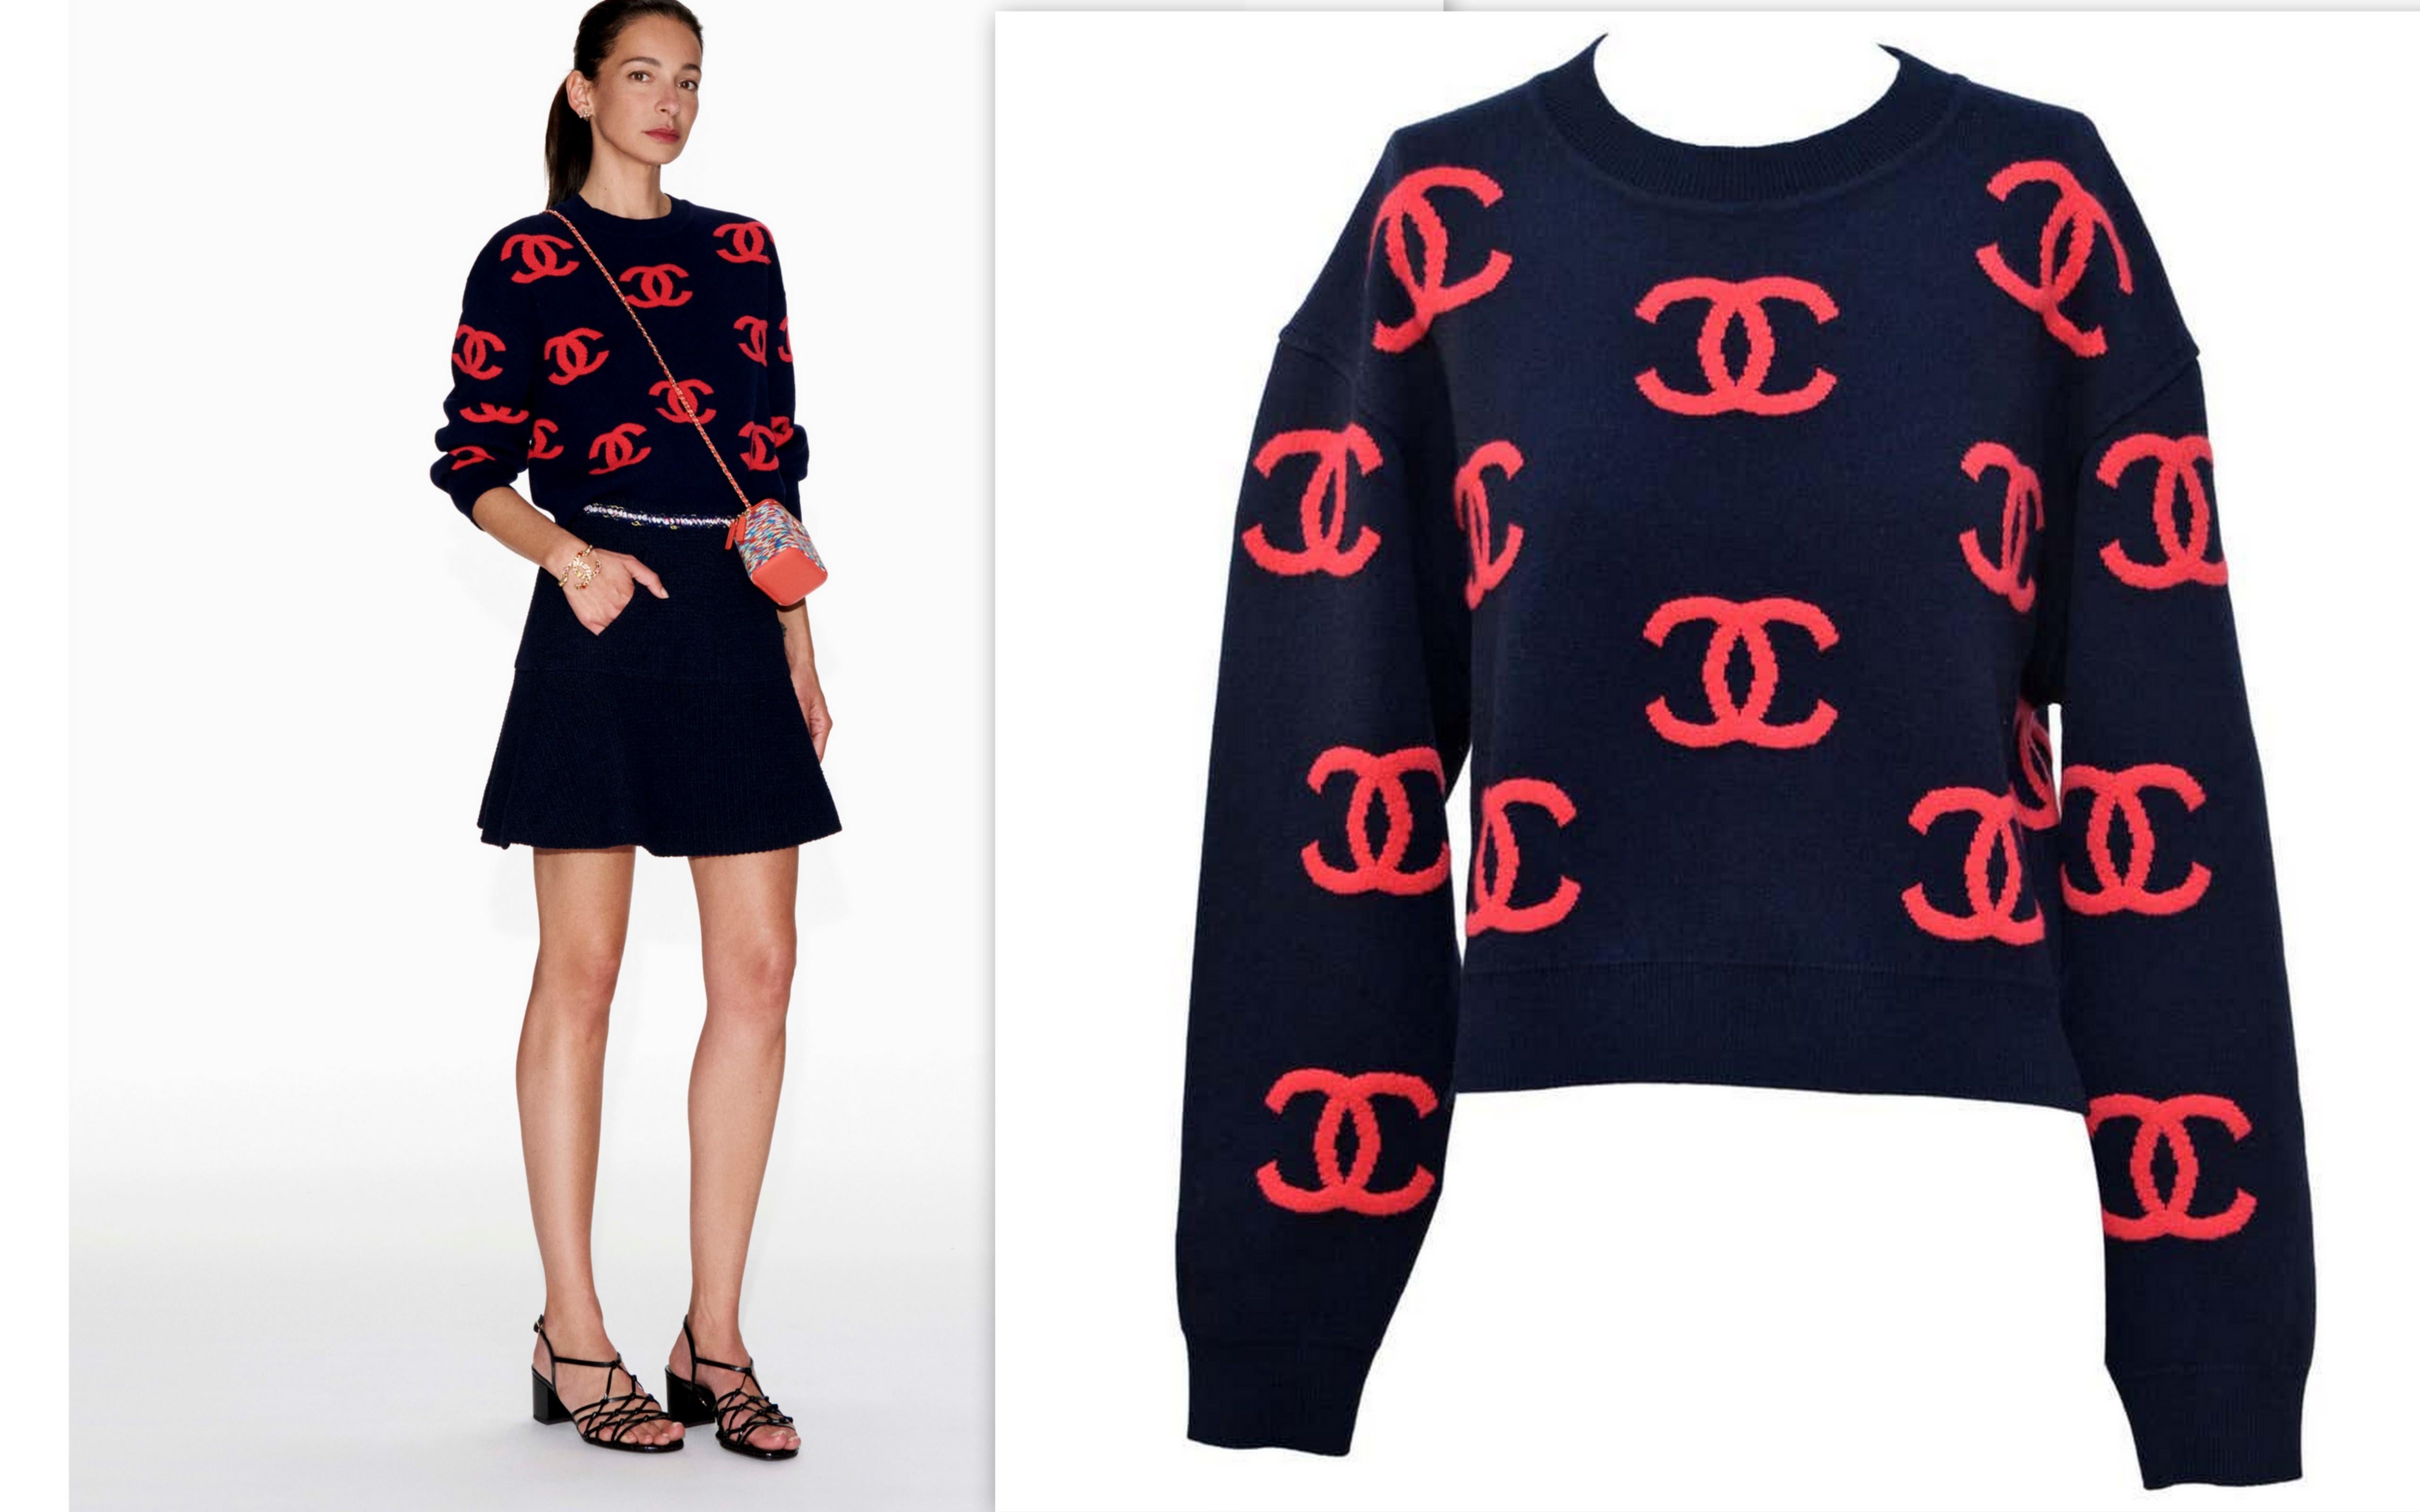 100% authentic guaranteed Chanel sweater .
Original receipt from Chanel available to purchaser upon request.
New with tags and Chanel  pouch
Size 38
Main base color in person is dark blue.Style is cropped .
Please familiarize yourself with Chanel